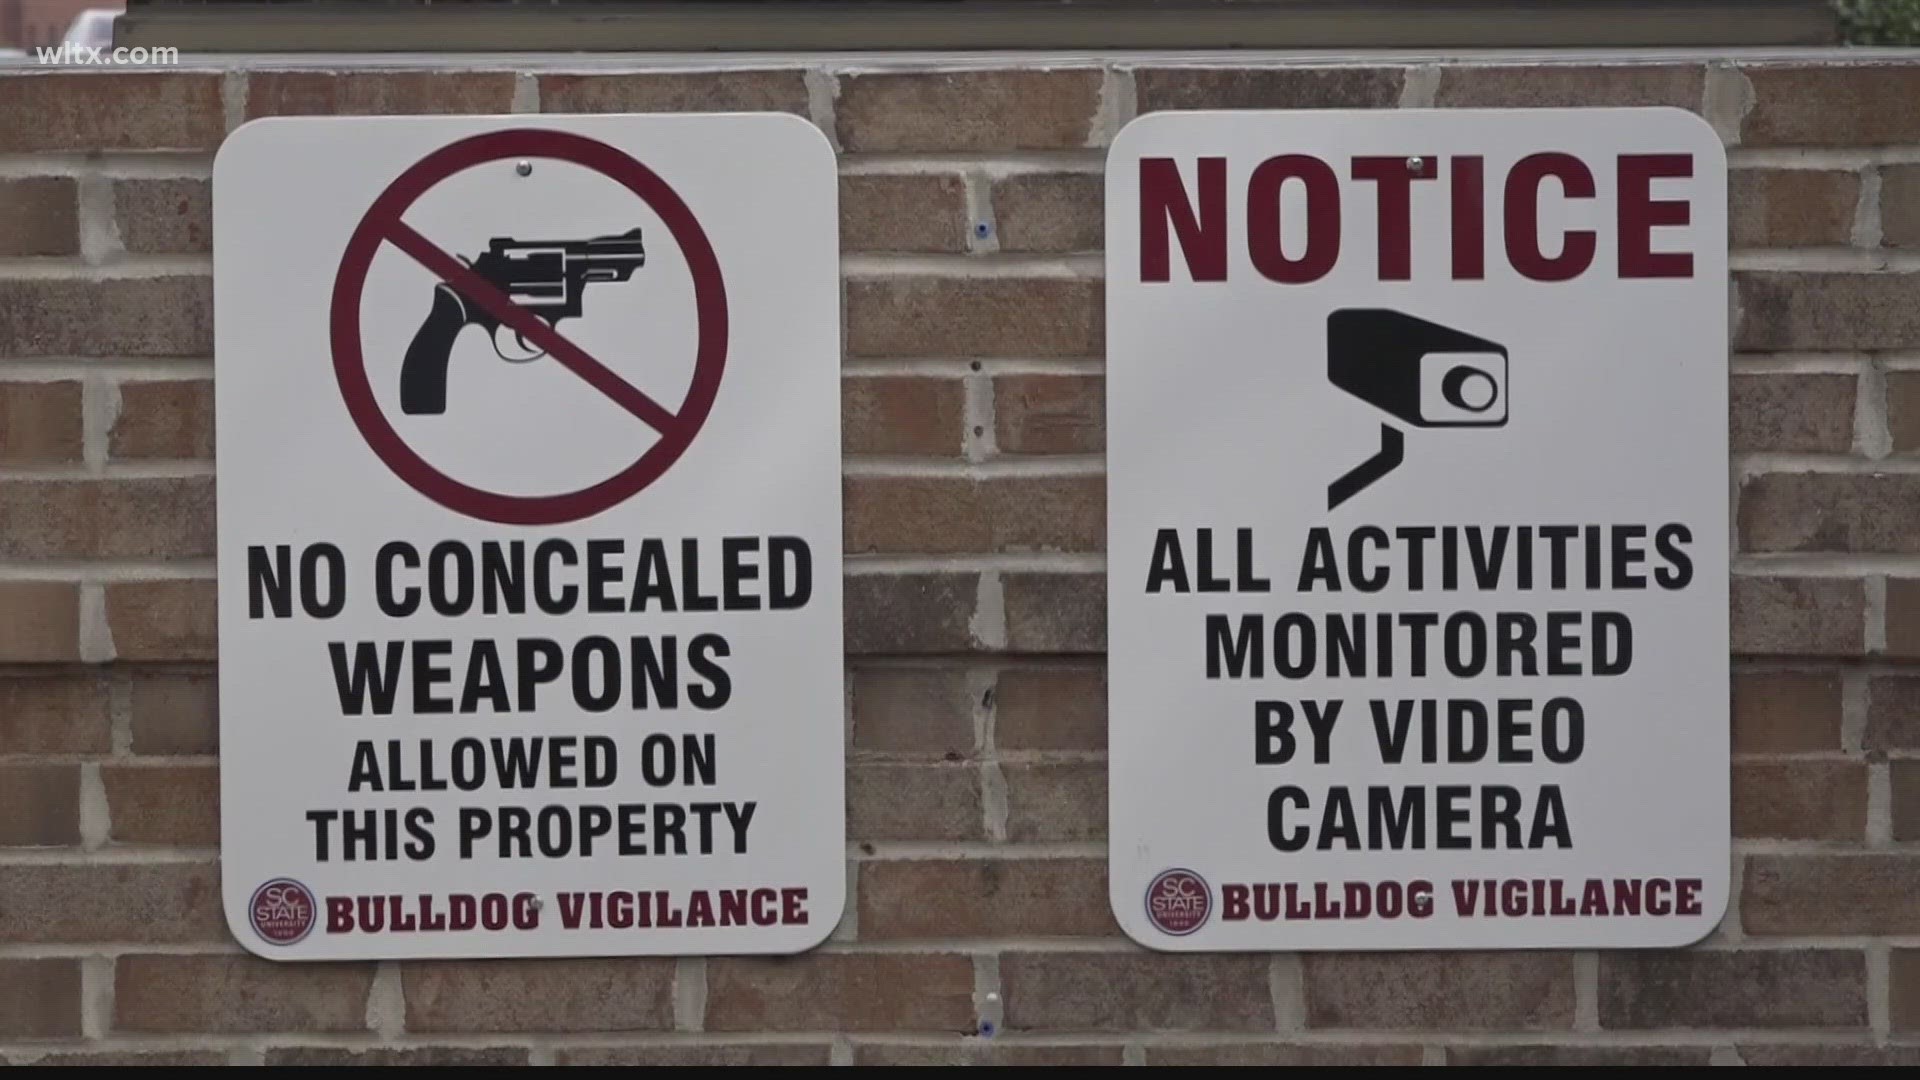 The university is upping security measures on campus after a shooting earlier this week.